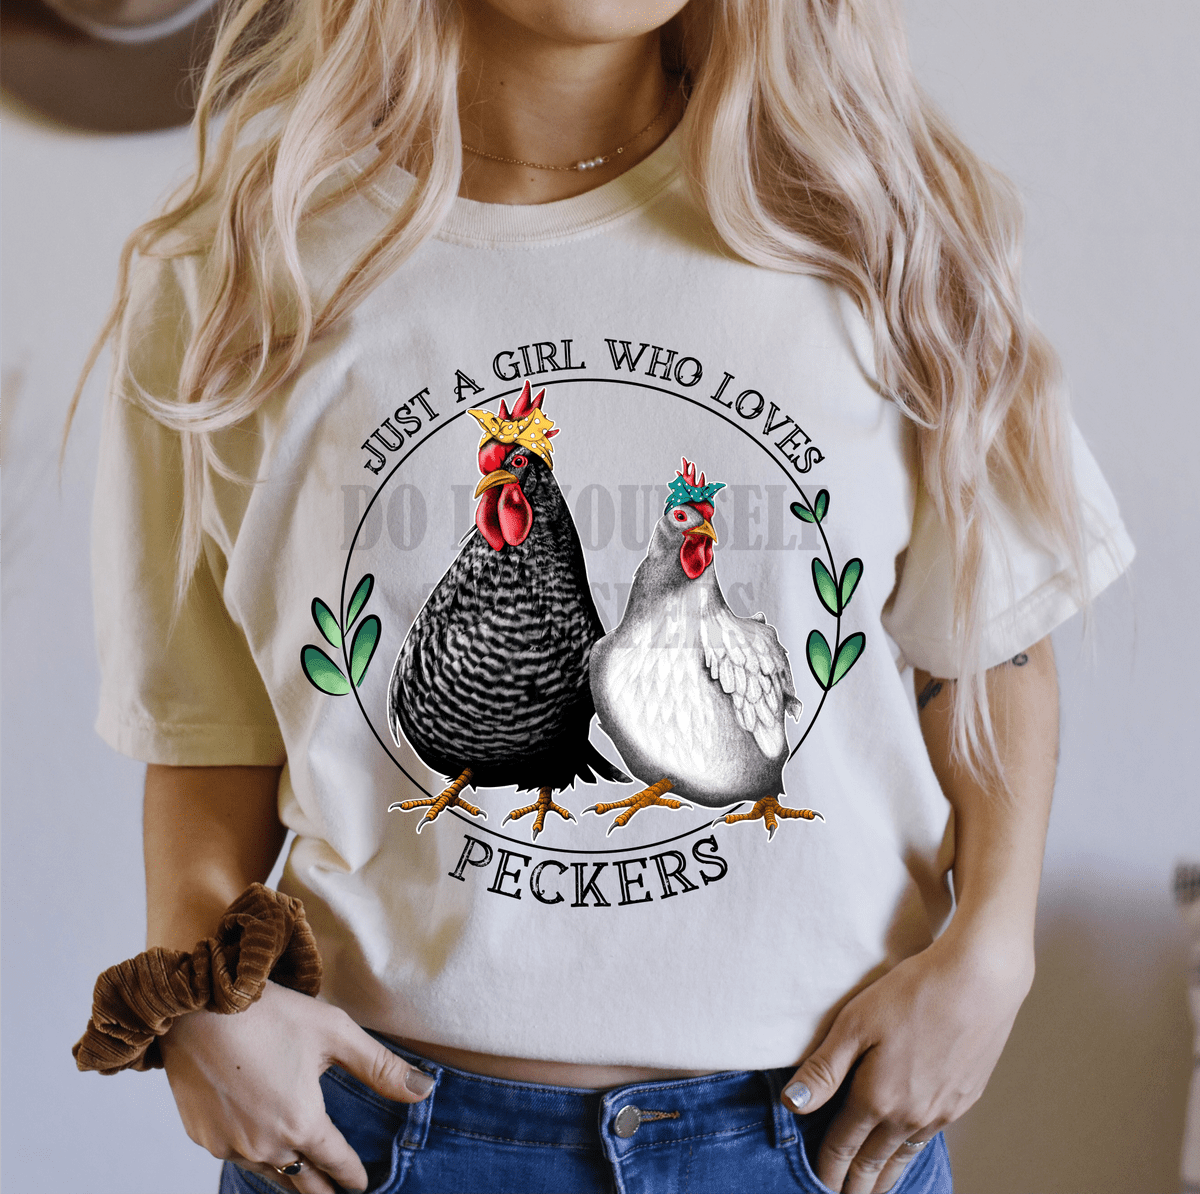 Just a girl who loves Peckers chickens farm Adult size 10.7x10.7 DTF TRANSFERPRINT TO ORDER - Do it yourself Transfers